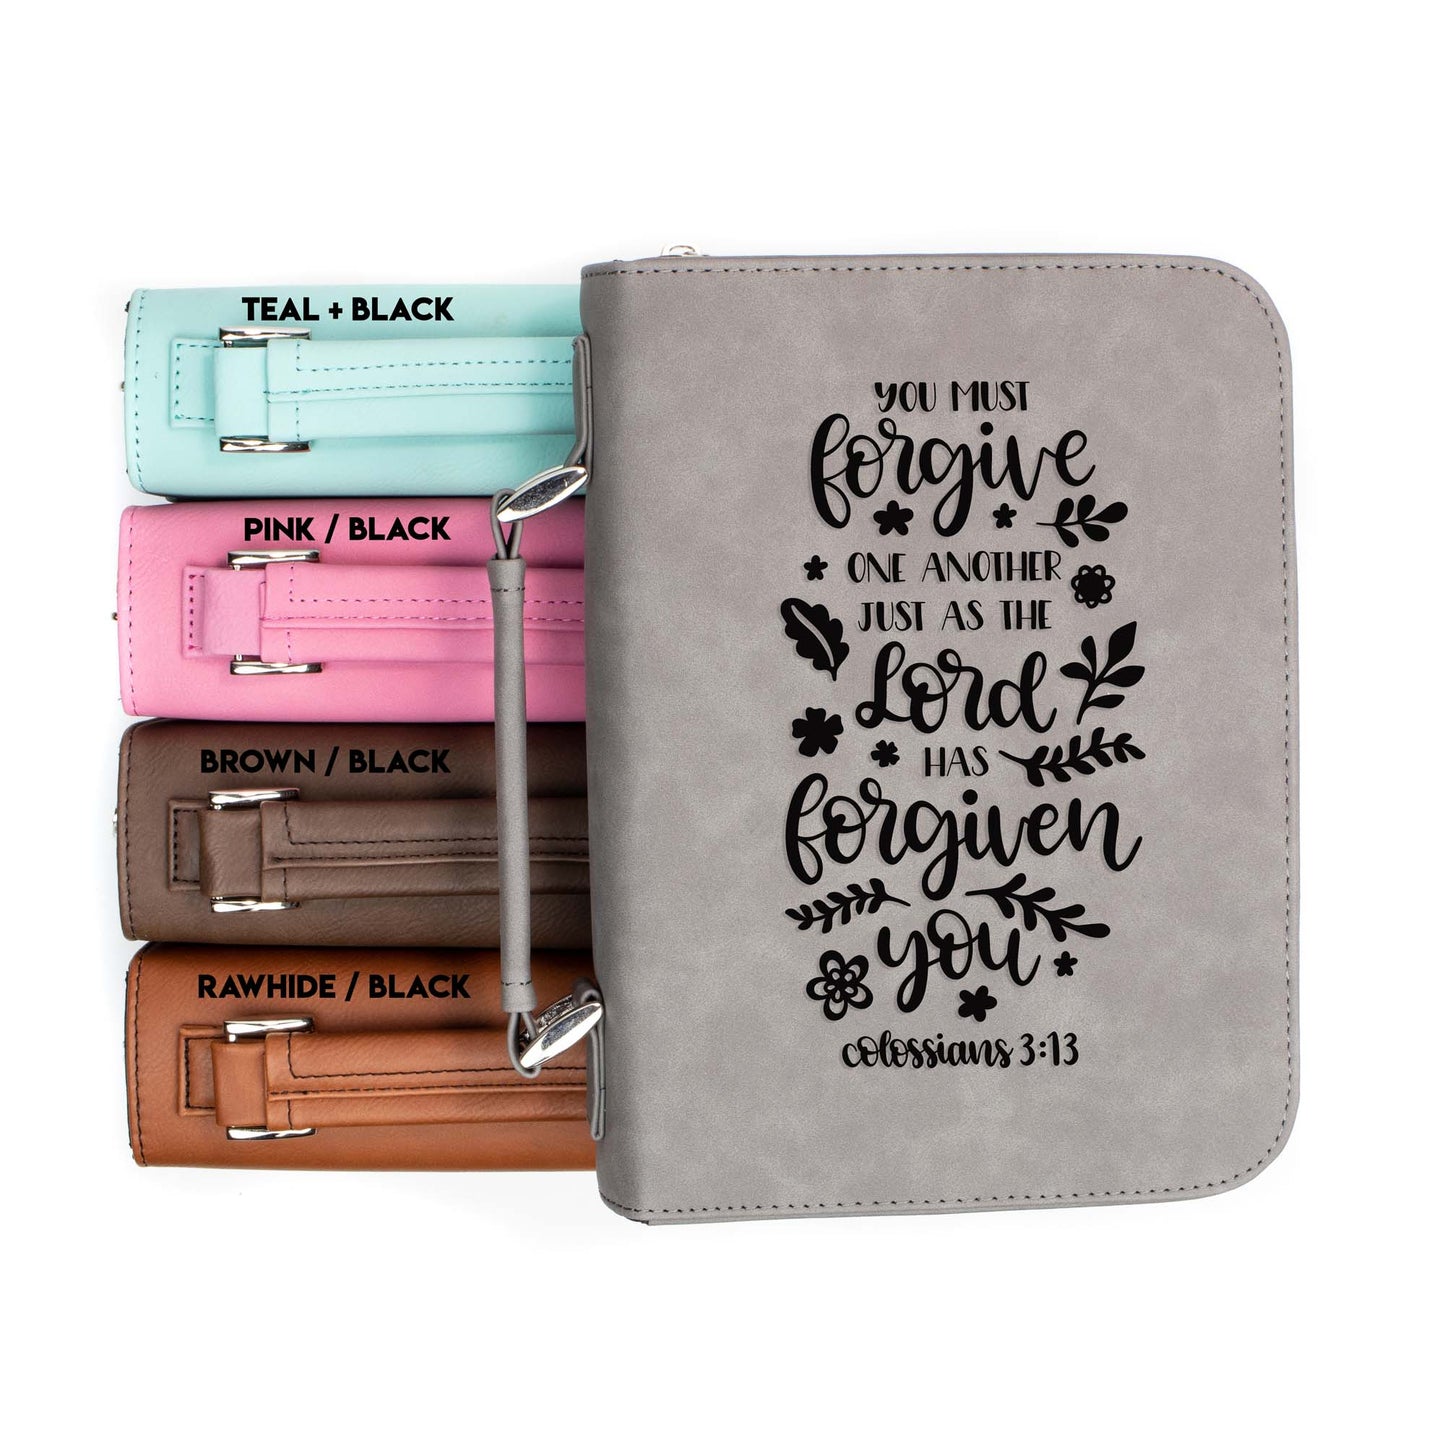 The Lord Has Forgiven You Colossians 3-13 Bible Cover | Faux Leather With Handle + Pockets